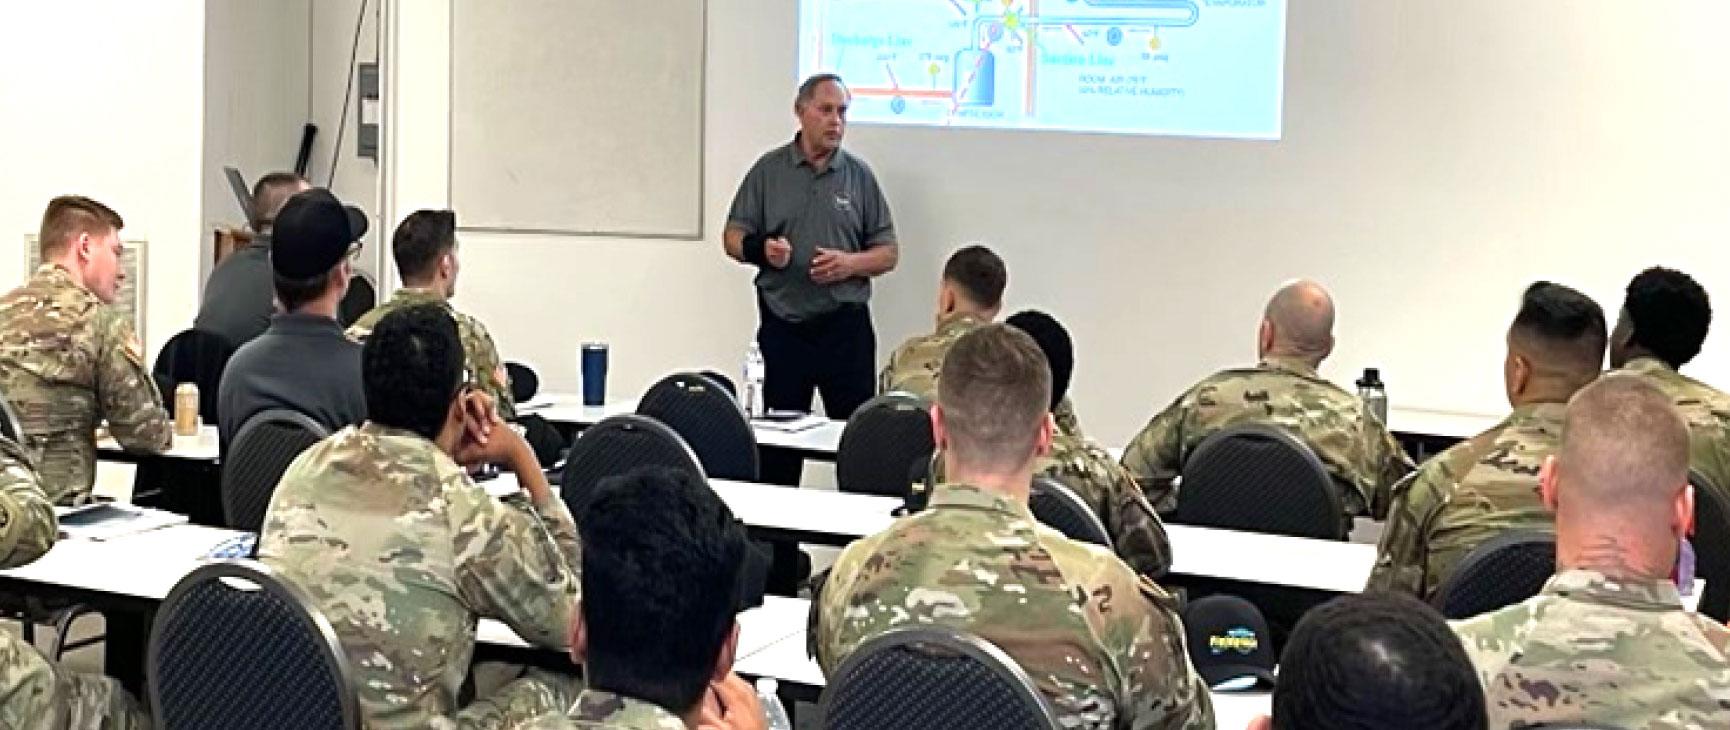 A teacher is in a classroom lecturing a class of military students.